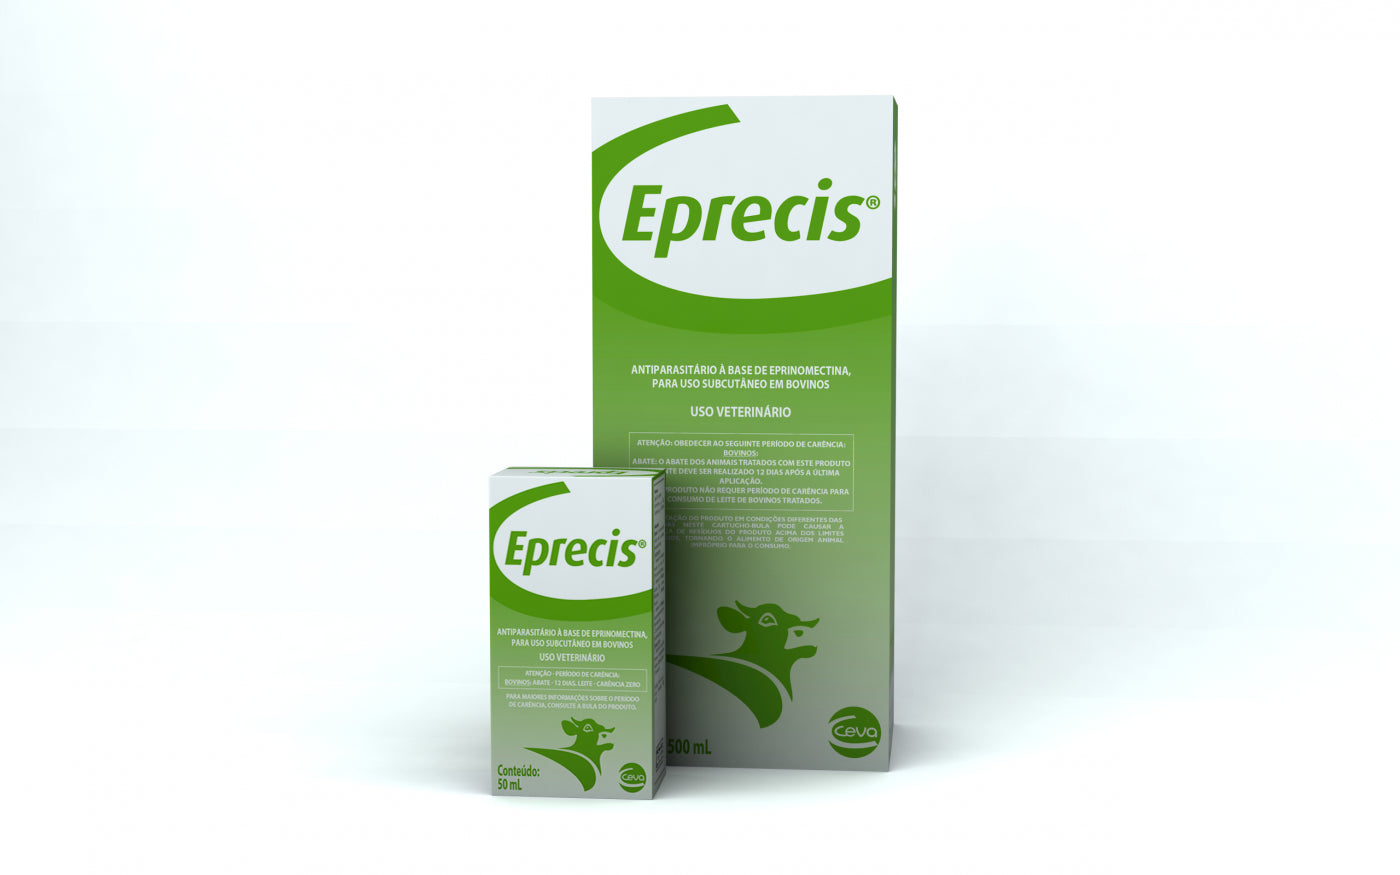 Eprecis 20 mg/ml solution for injection